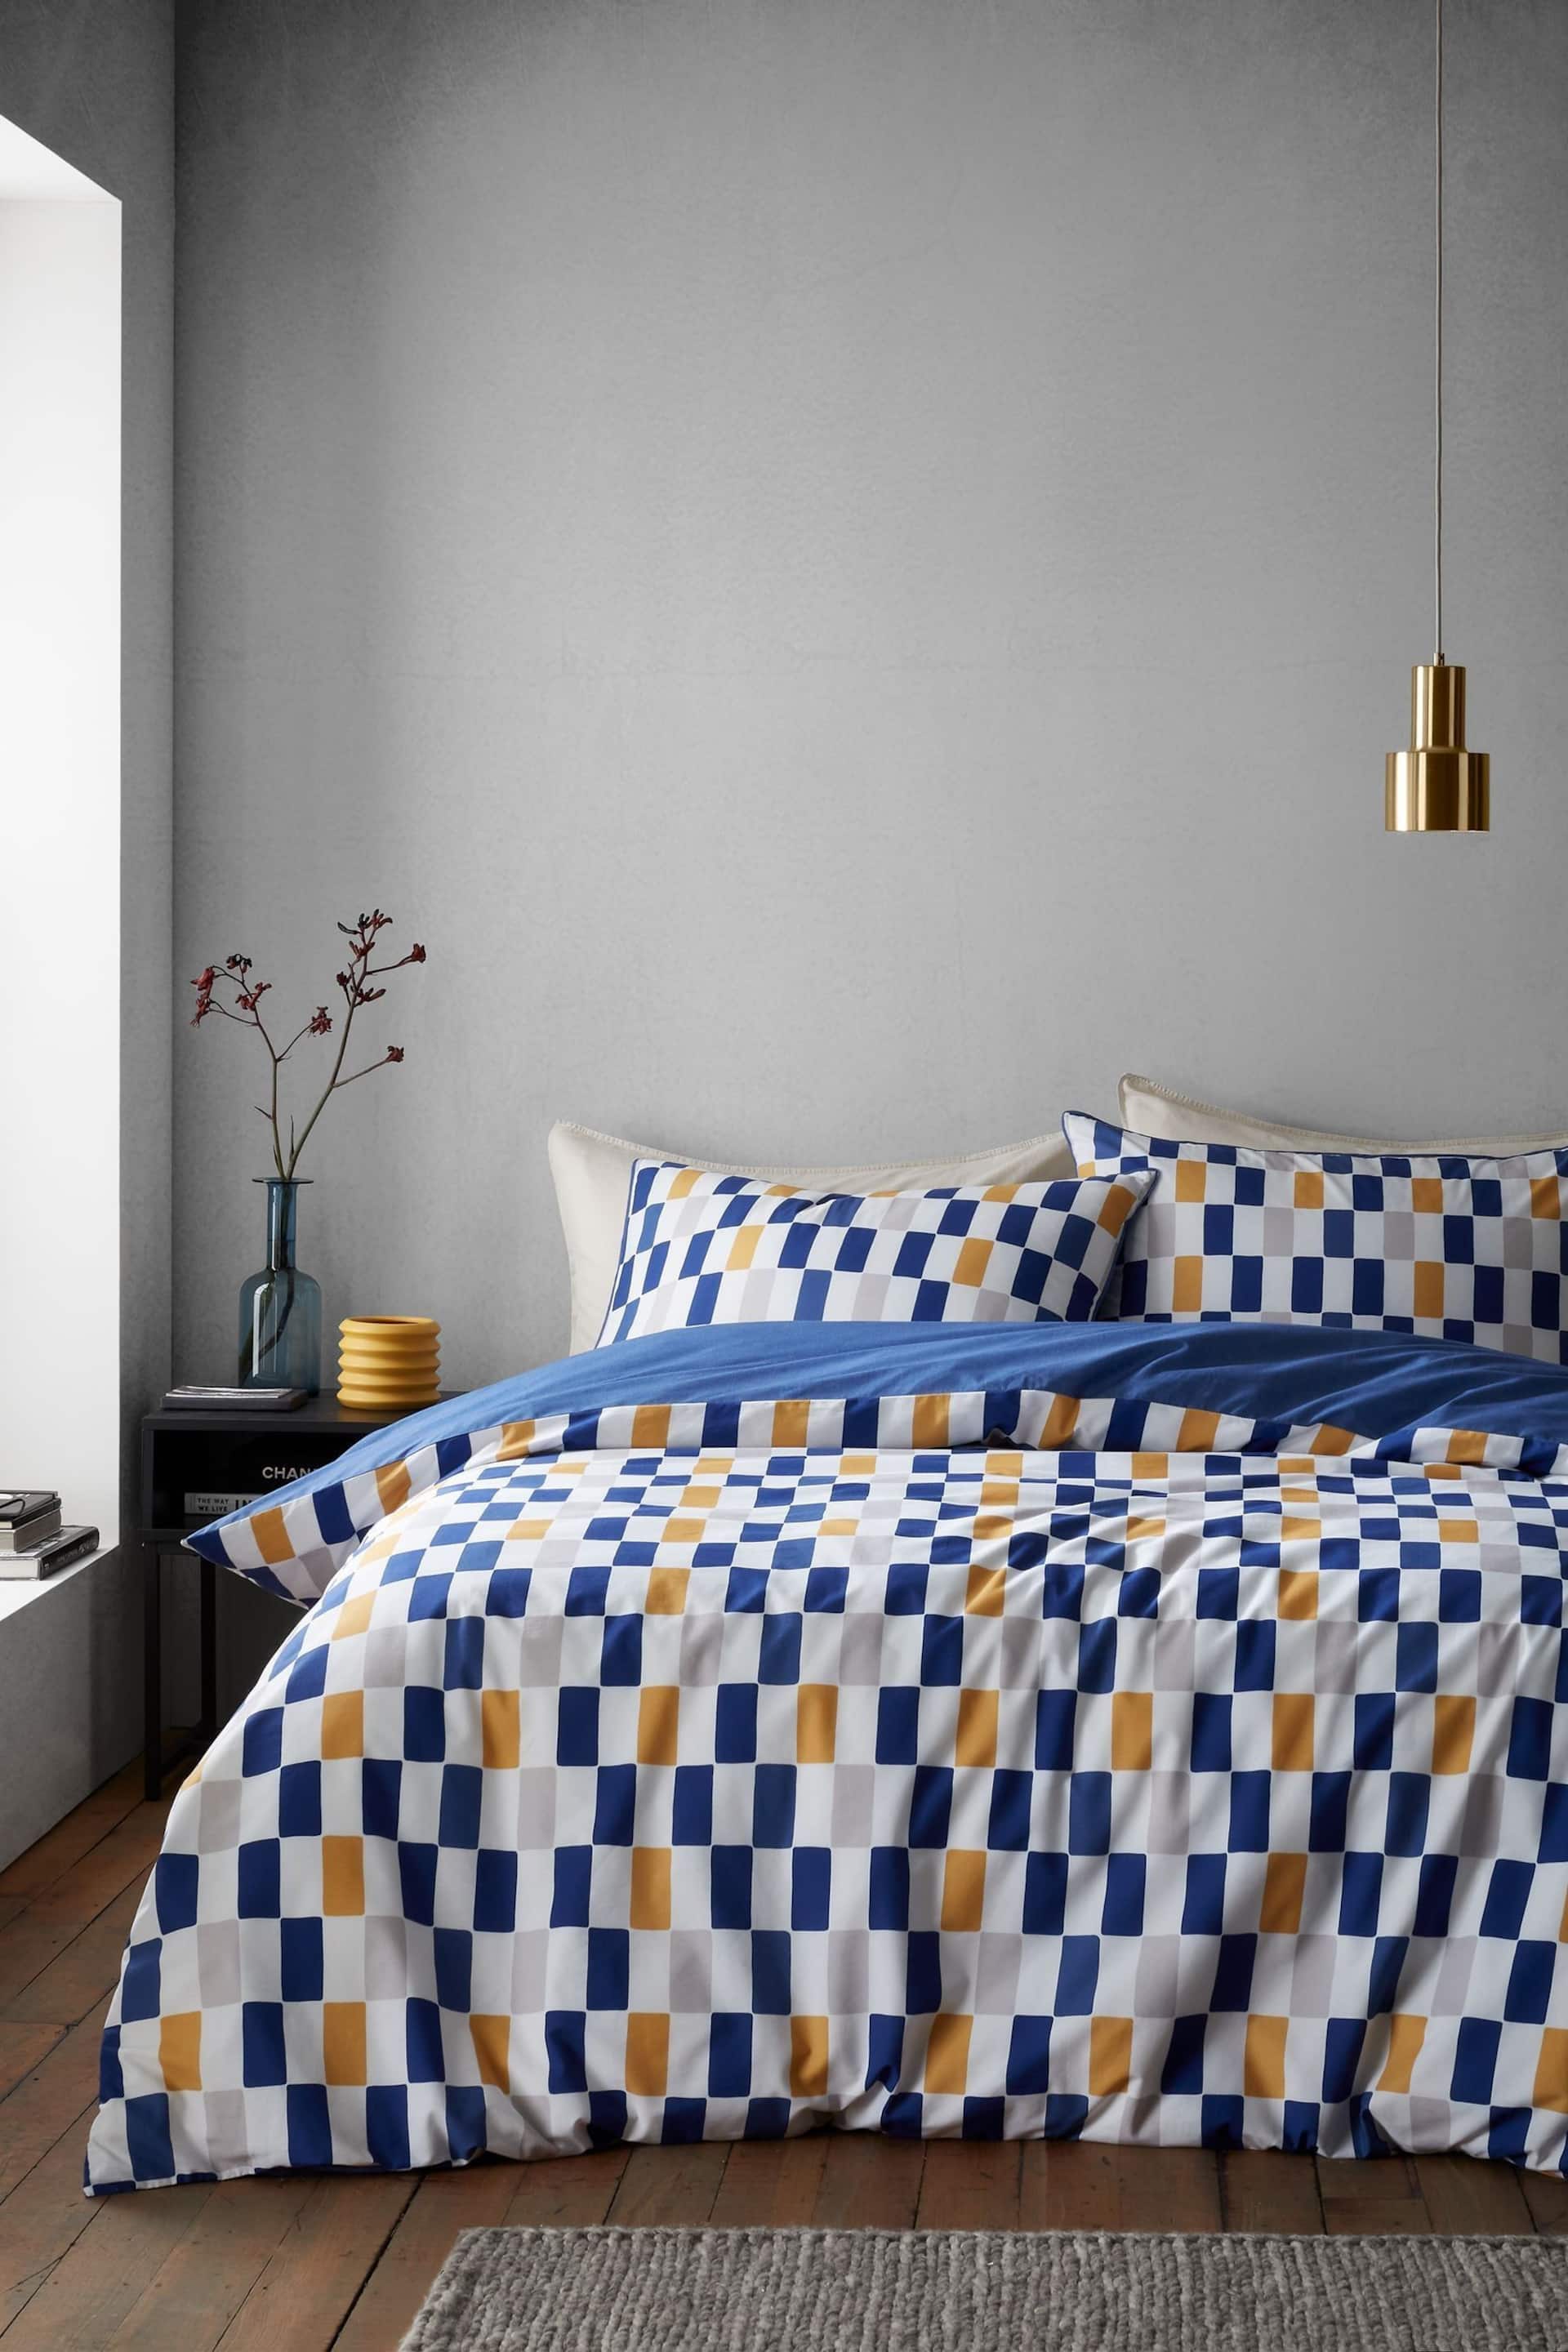 Content by Terence Conran Blue Oblong Checkerboard Cotton Duvet Cover Set - Image 1 of 4